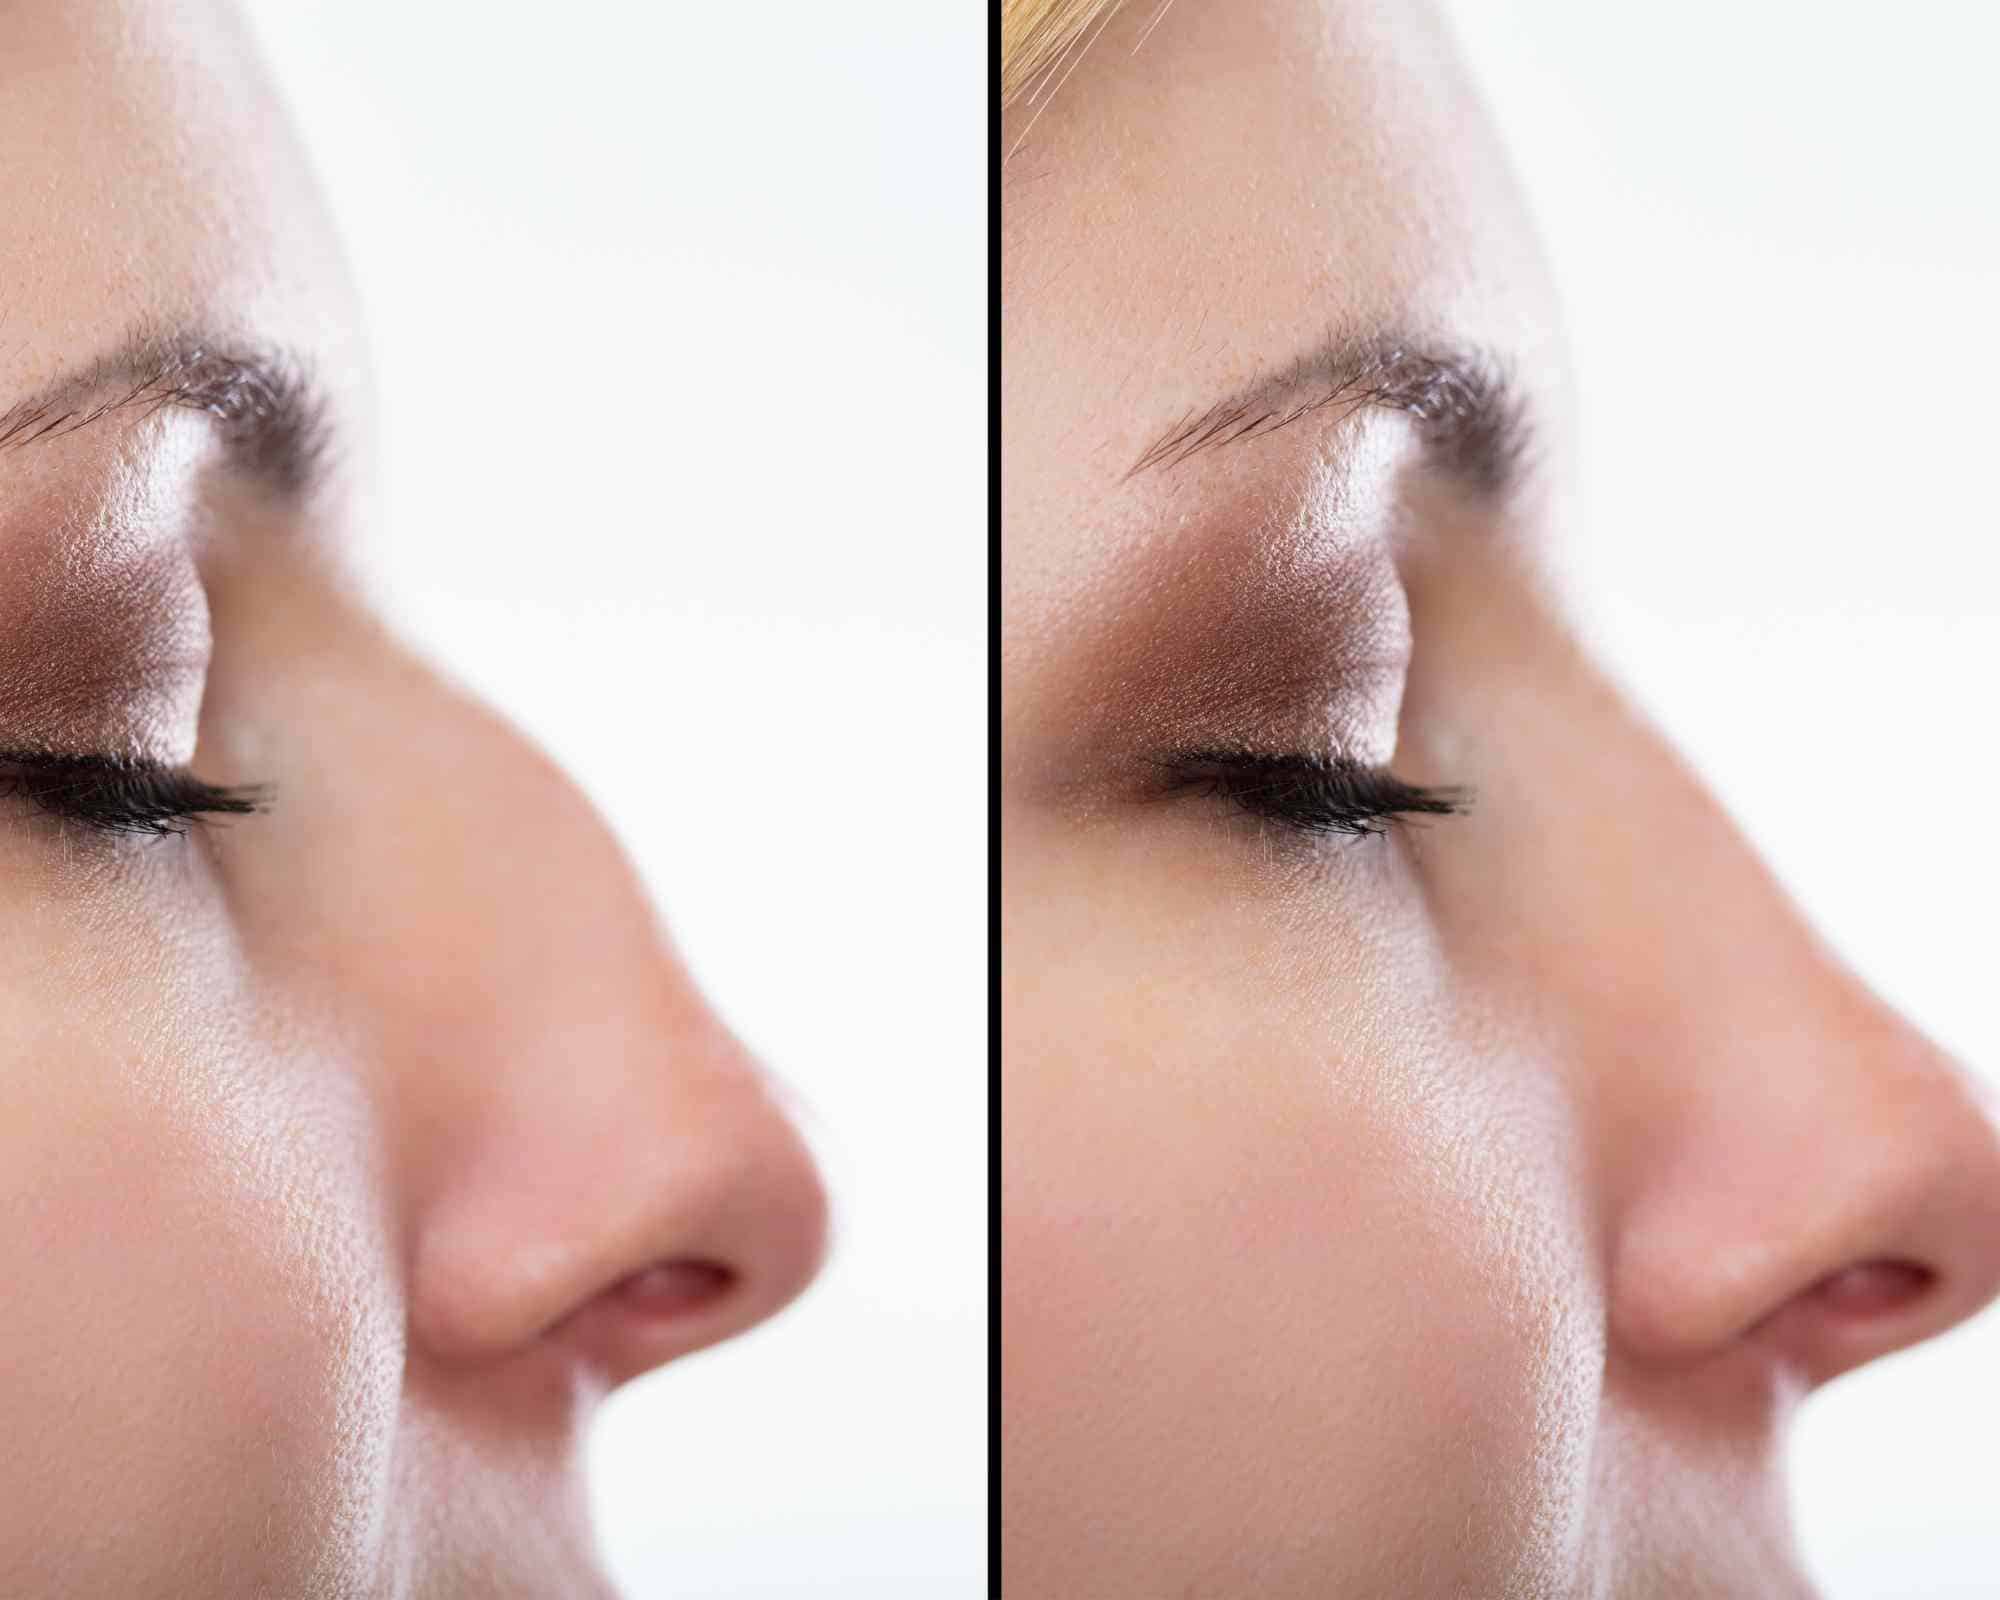 NON SURGCIAL RHINOPLASTY RESULTS